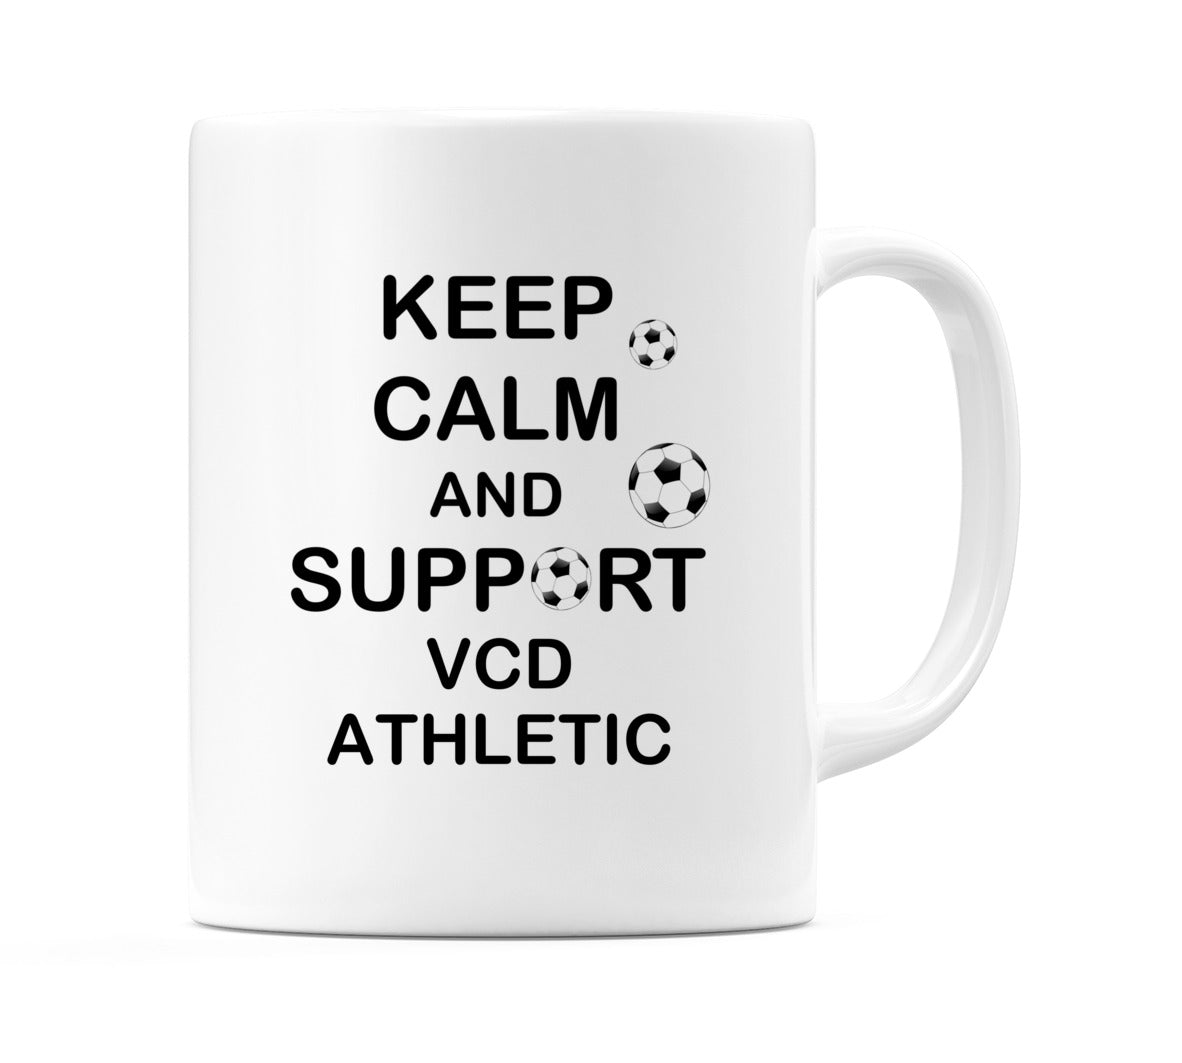 Keep Calm And Support VCD Athletic Mug